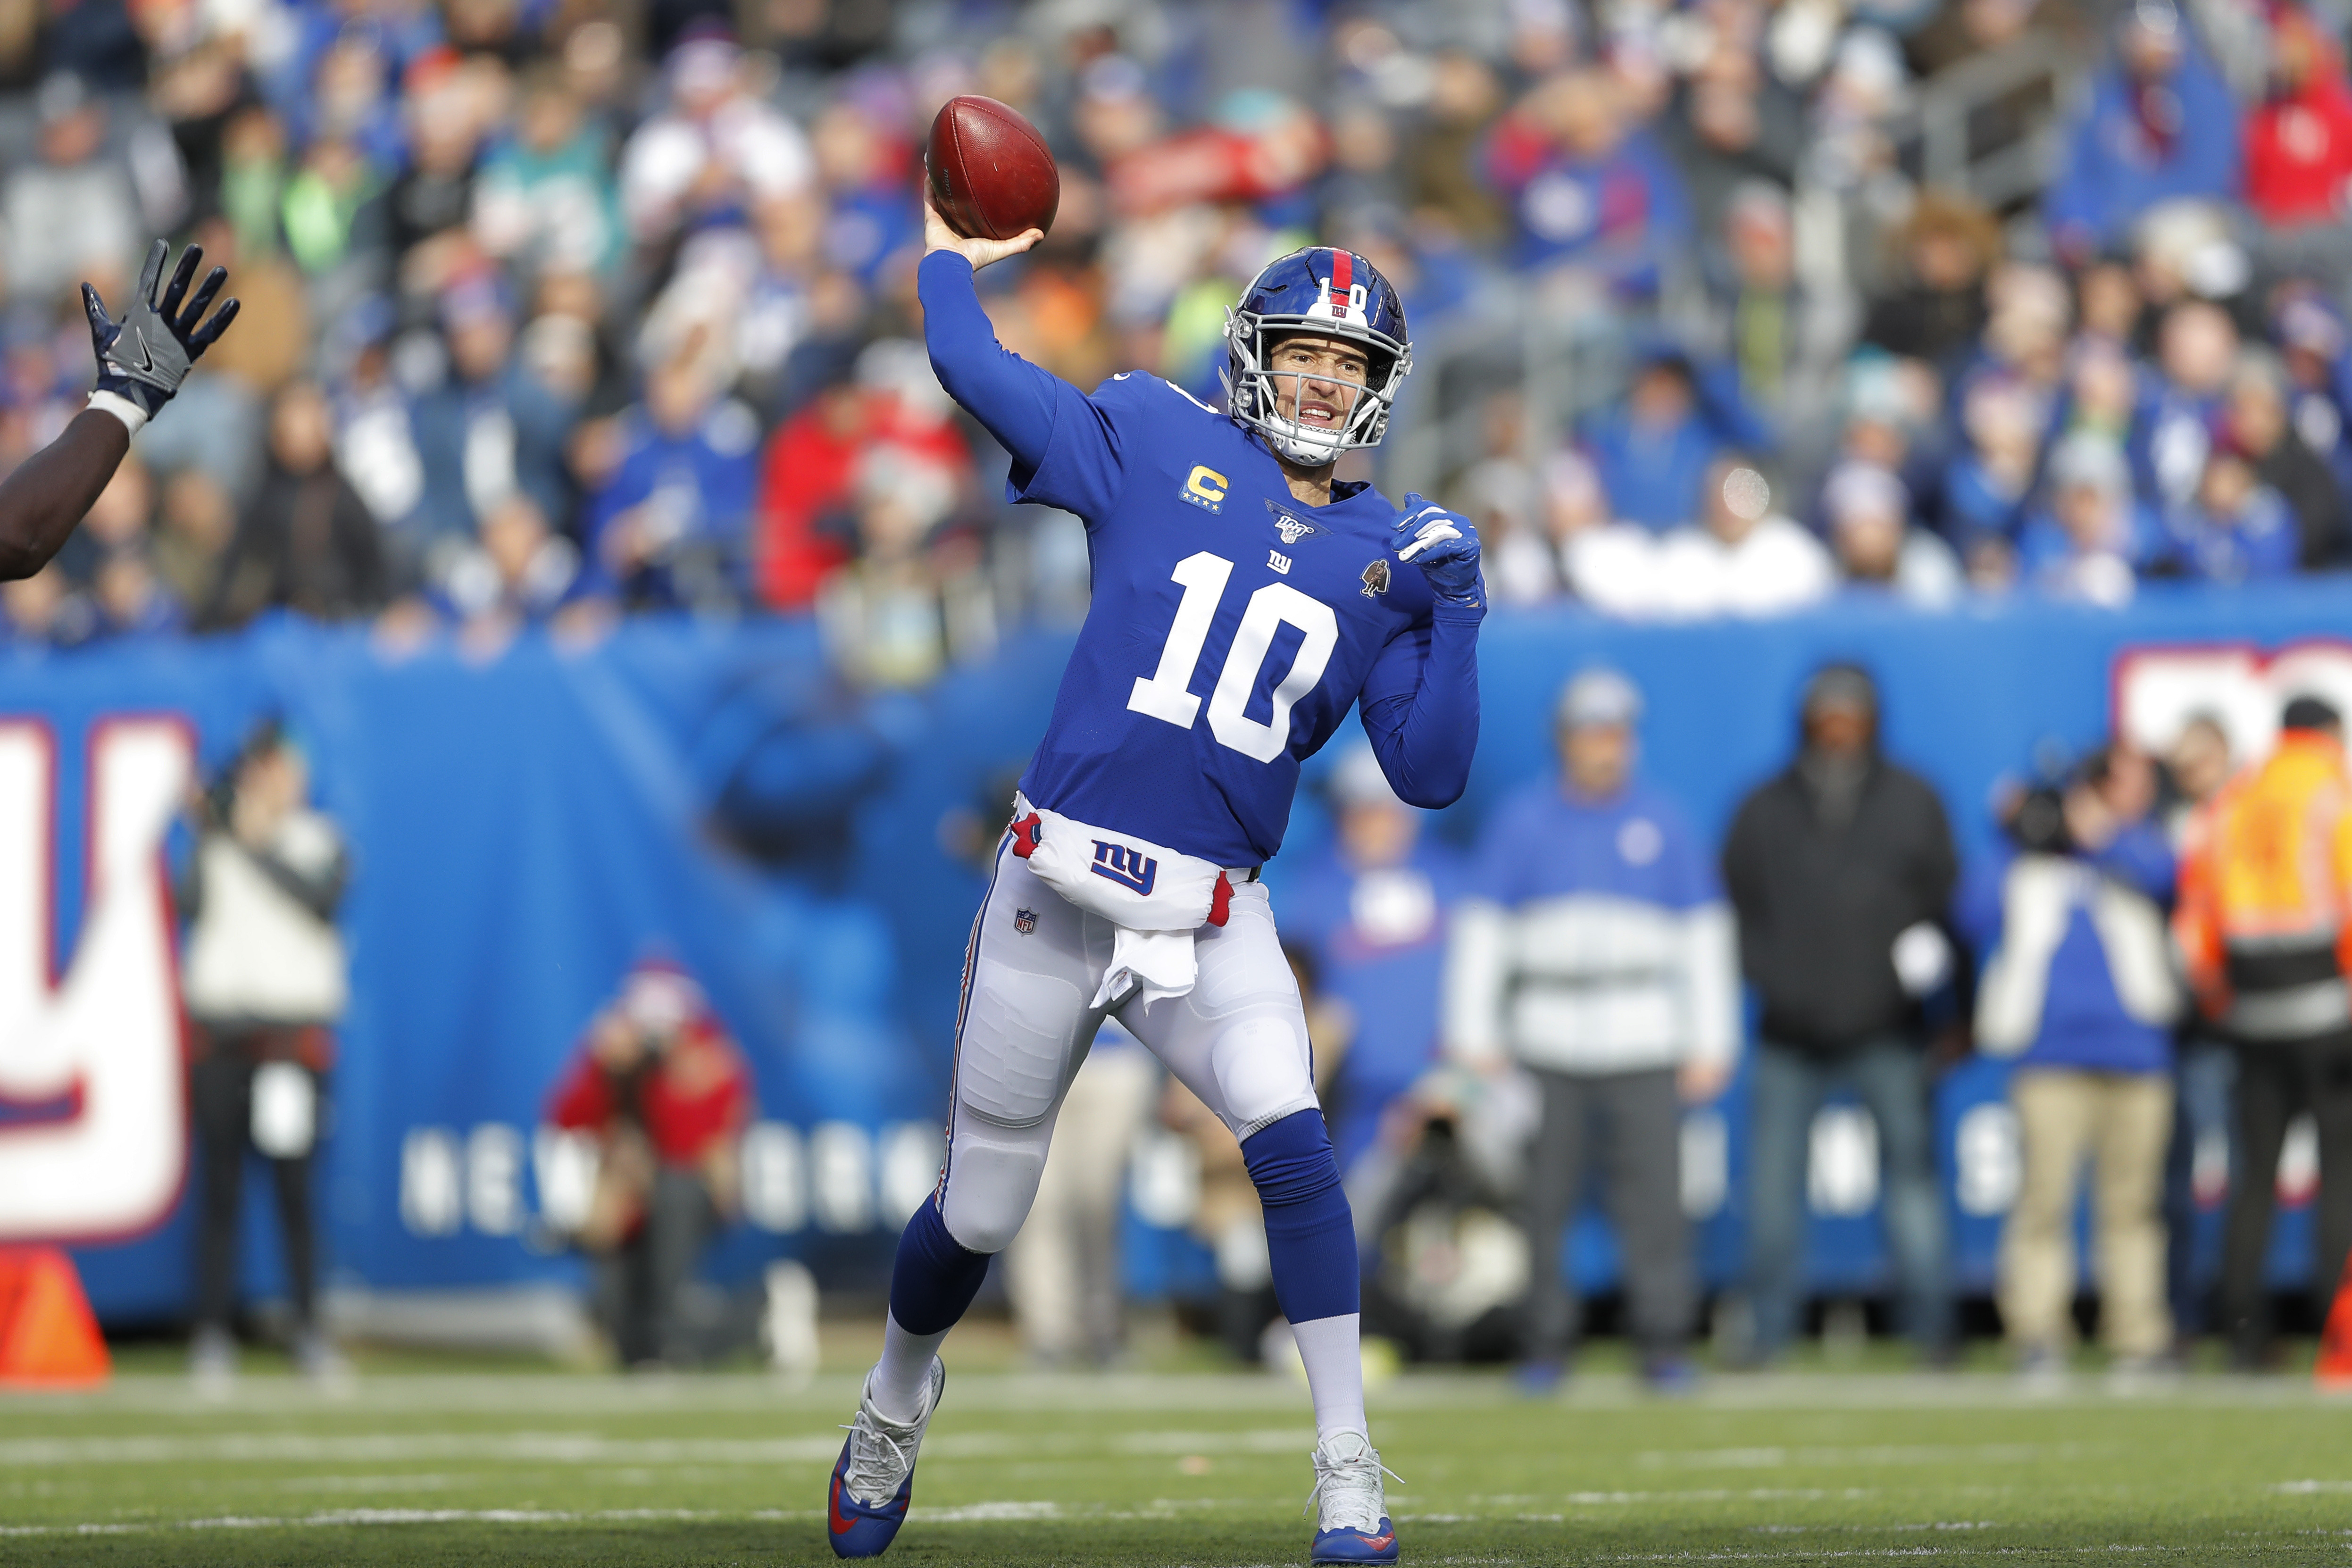 Eli Manning Retires from NFL, Ends Career with New York Giants